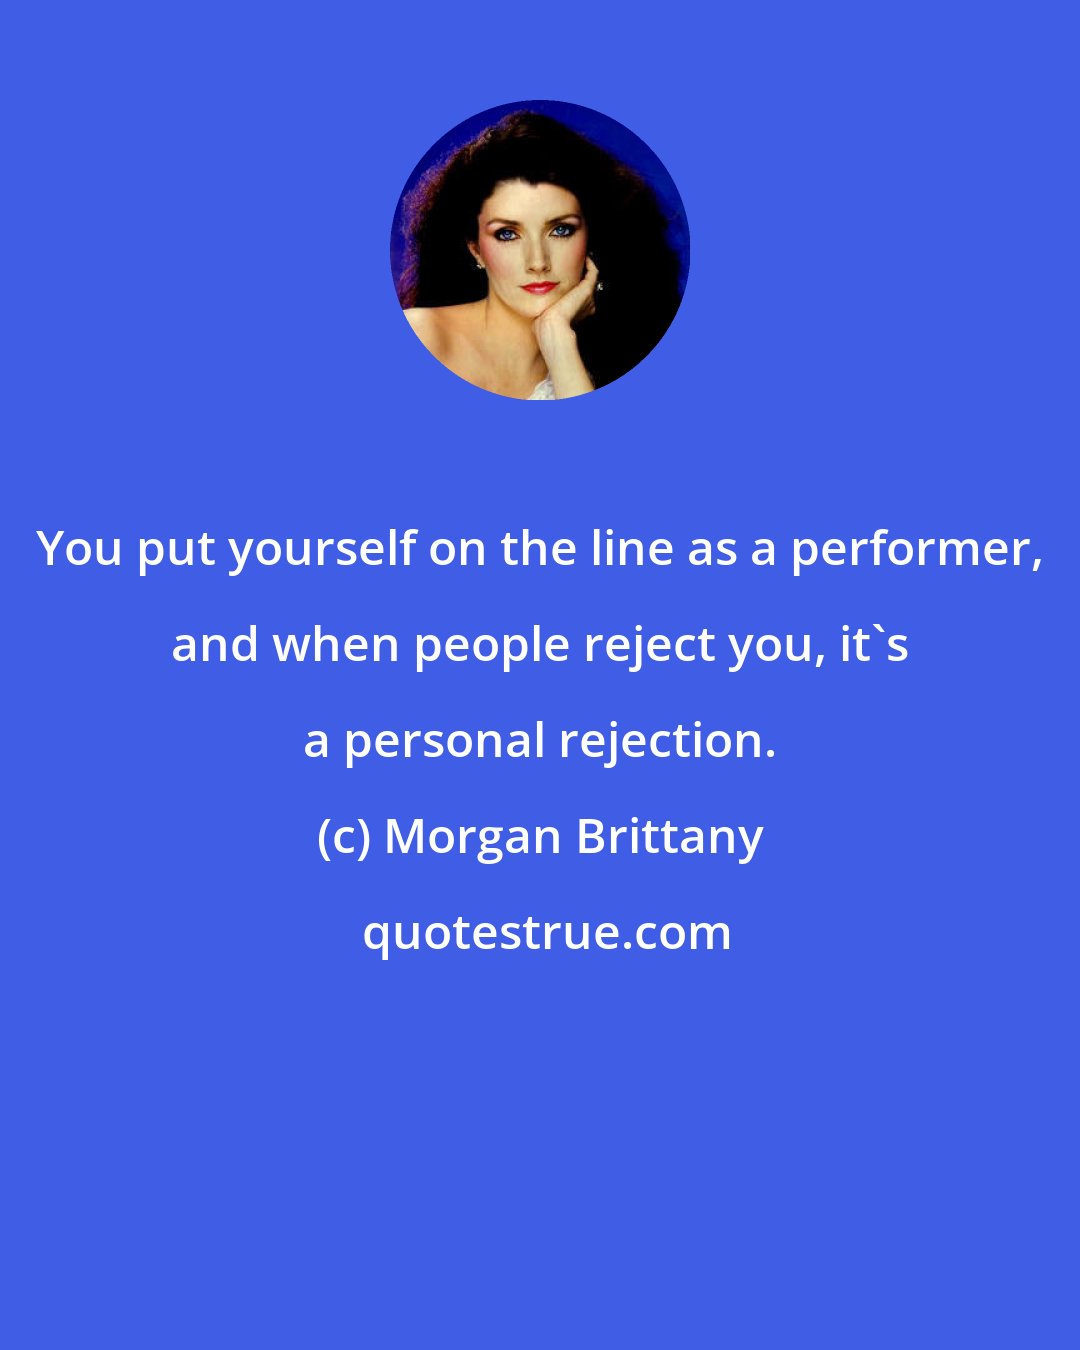 Morgan Brittany: You put yourself on the line as a performer, and when people reject you, it's a personal rejection.